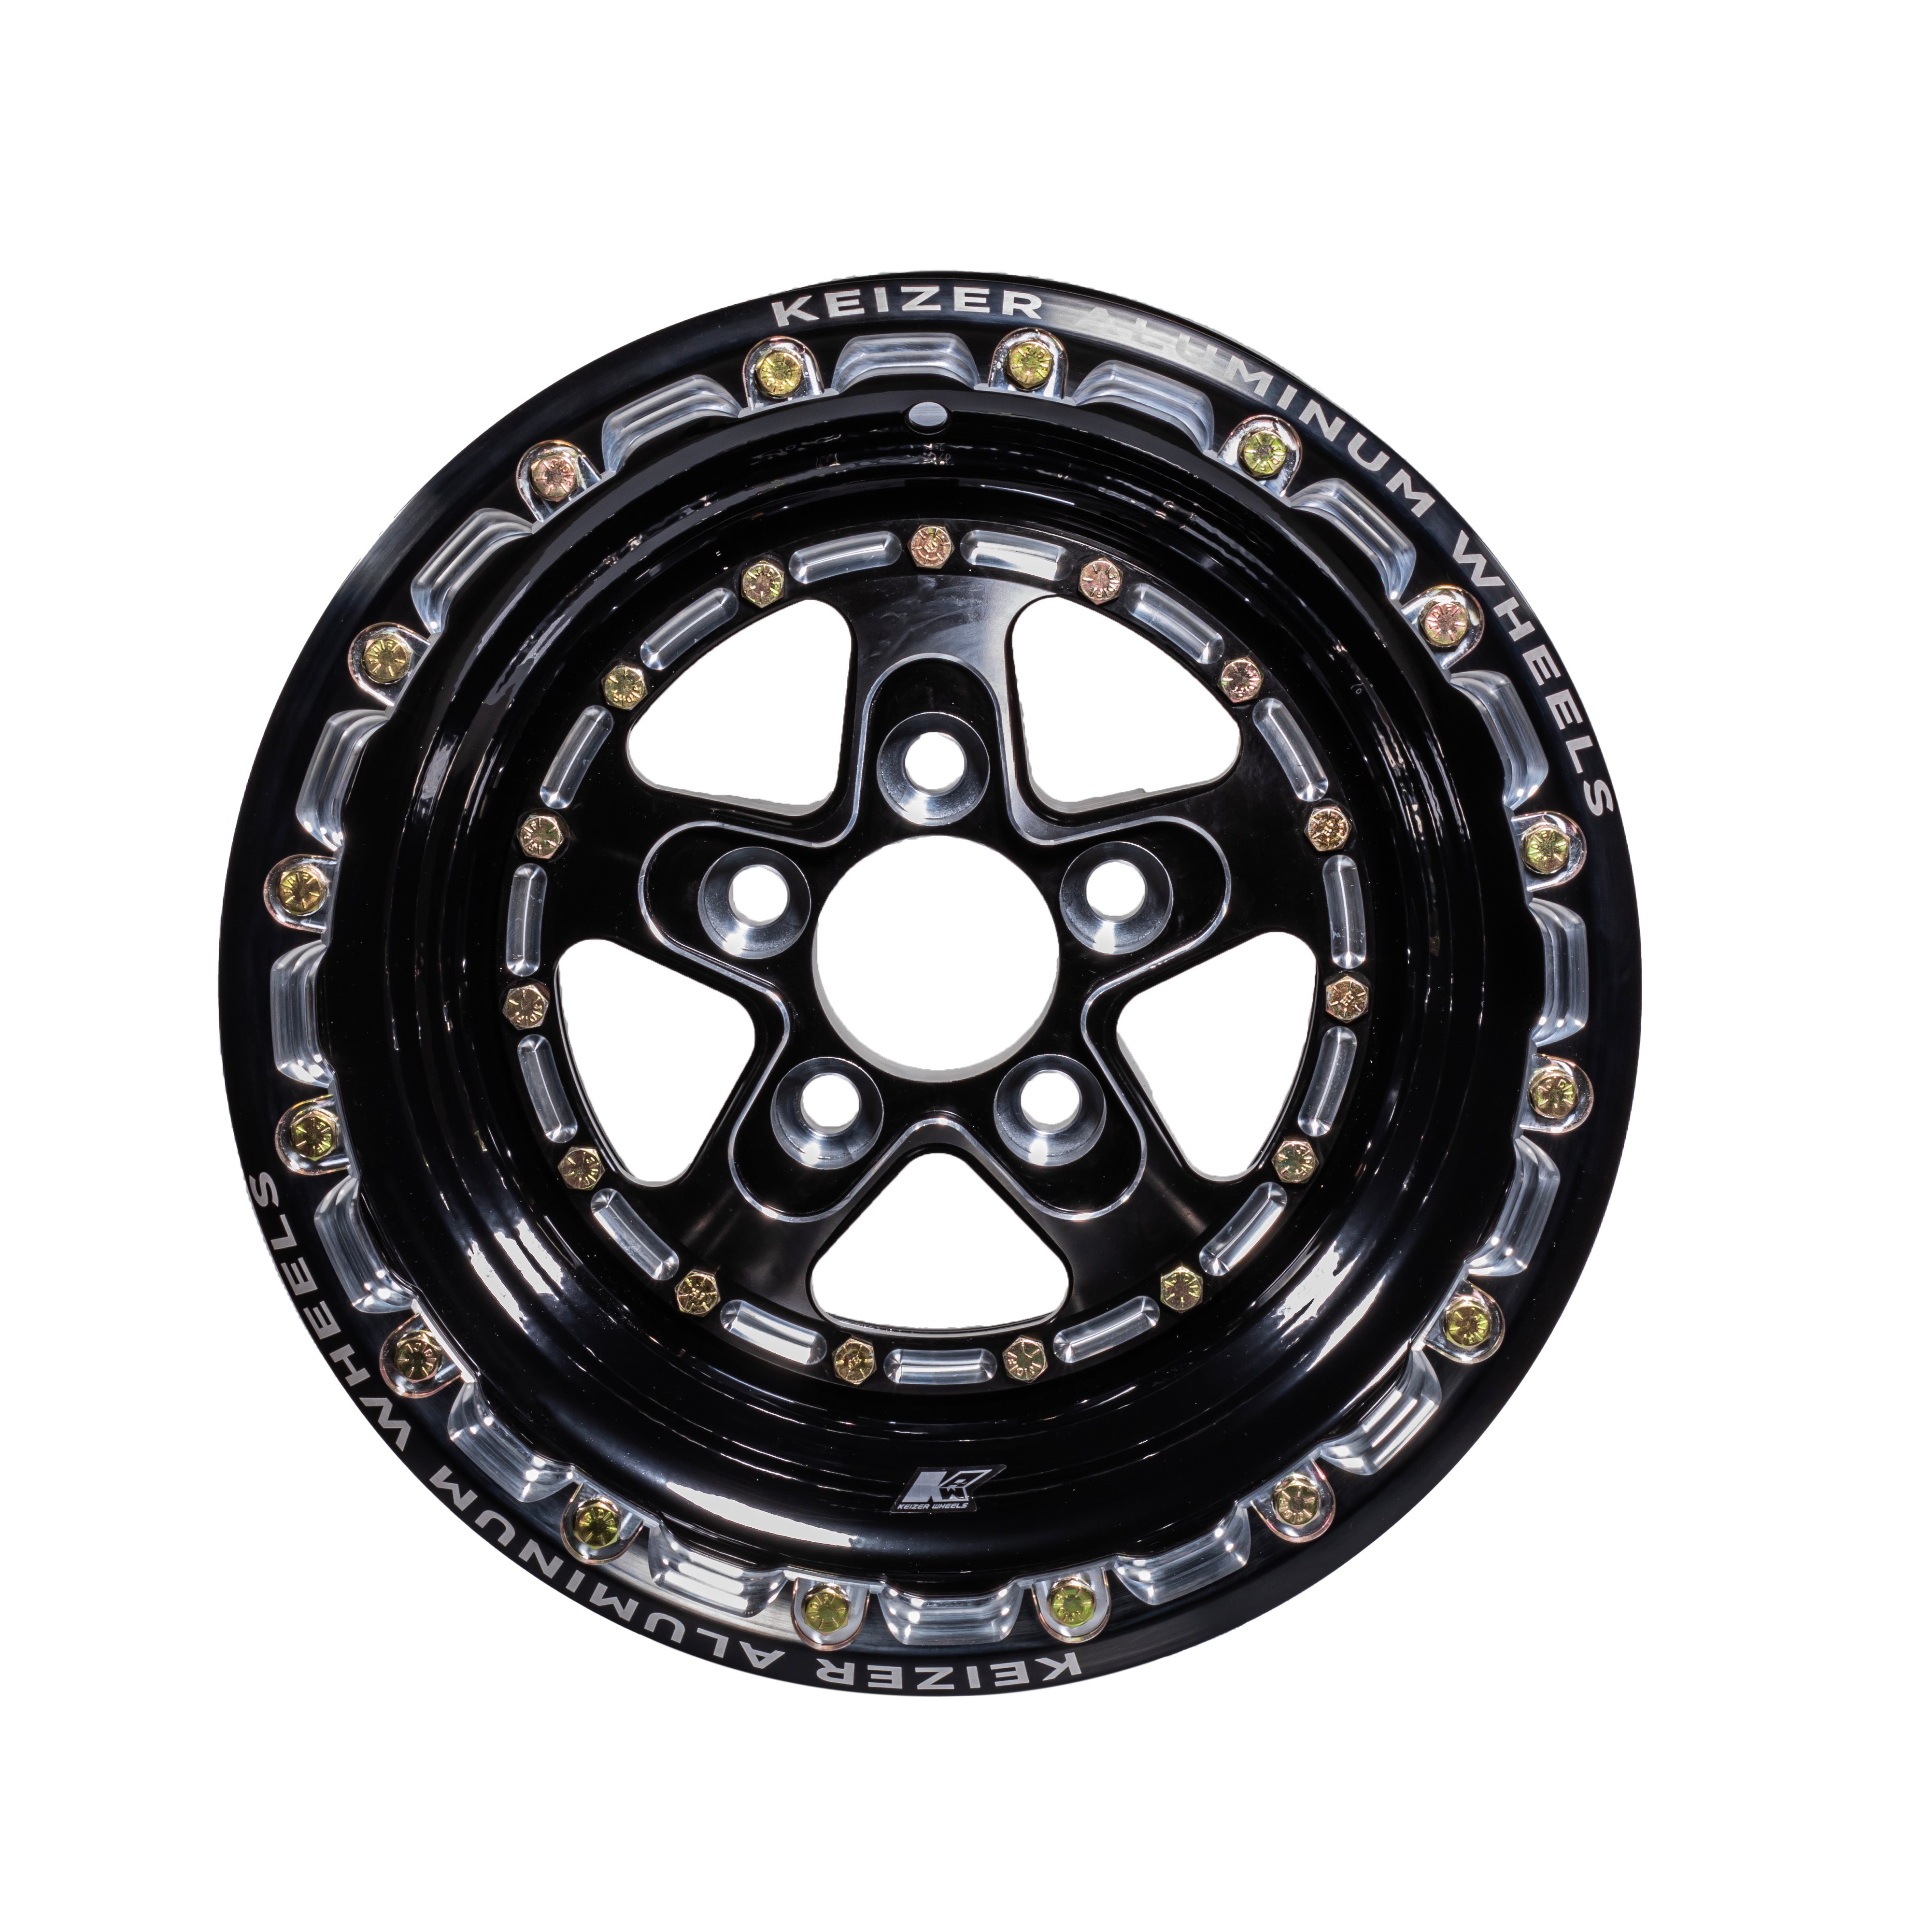 KEIZER FULL Raceparts HOUSE FORGED Synergy WHEEL - (REAR)